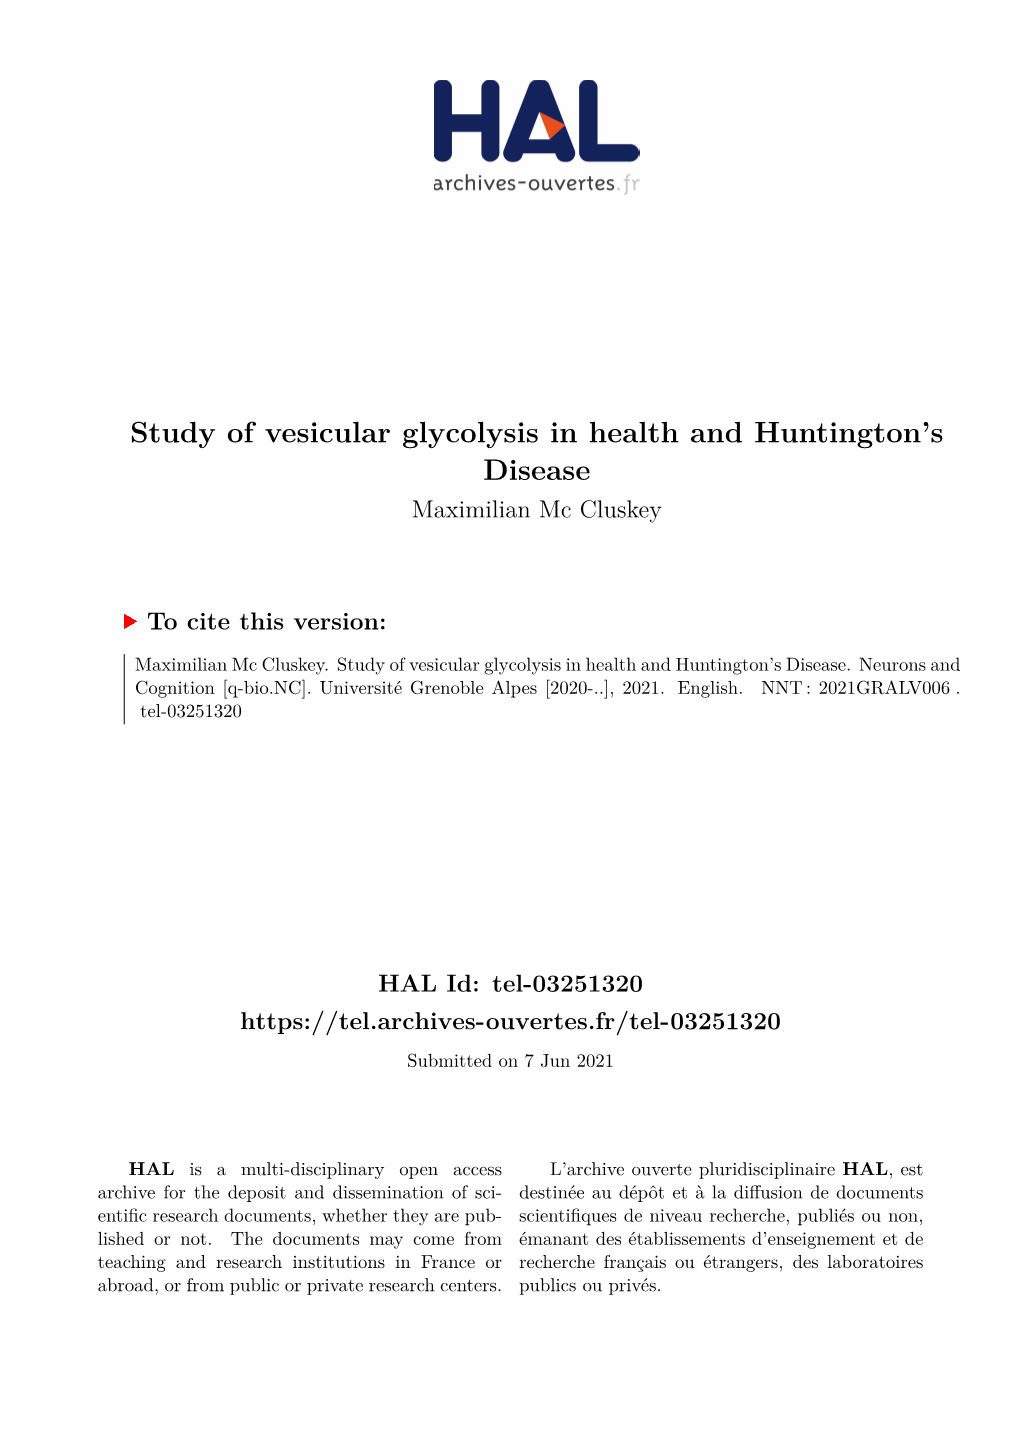 Study of Vesicular Glycolysis in Health and Huntington's Disease